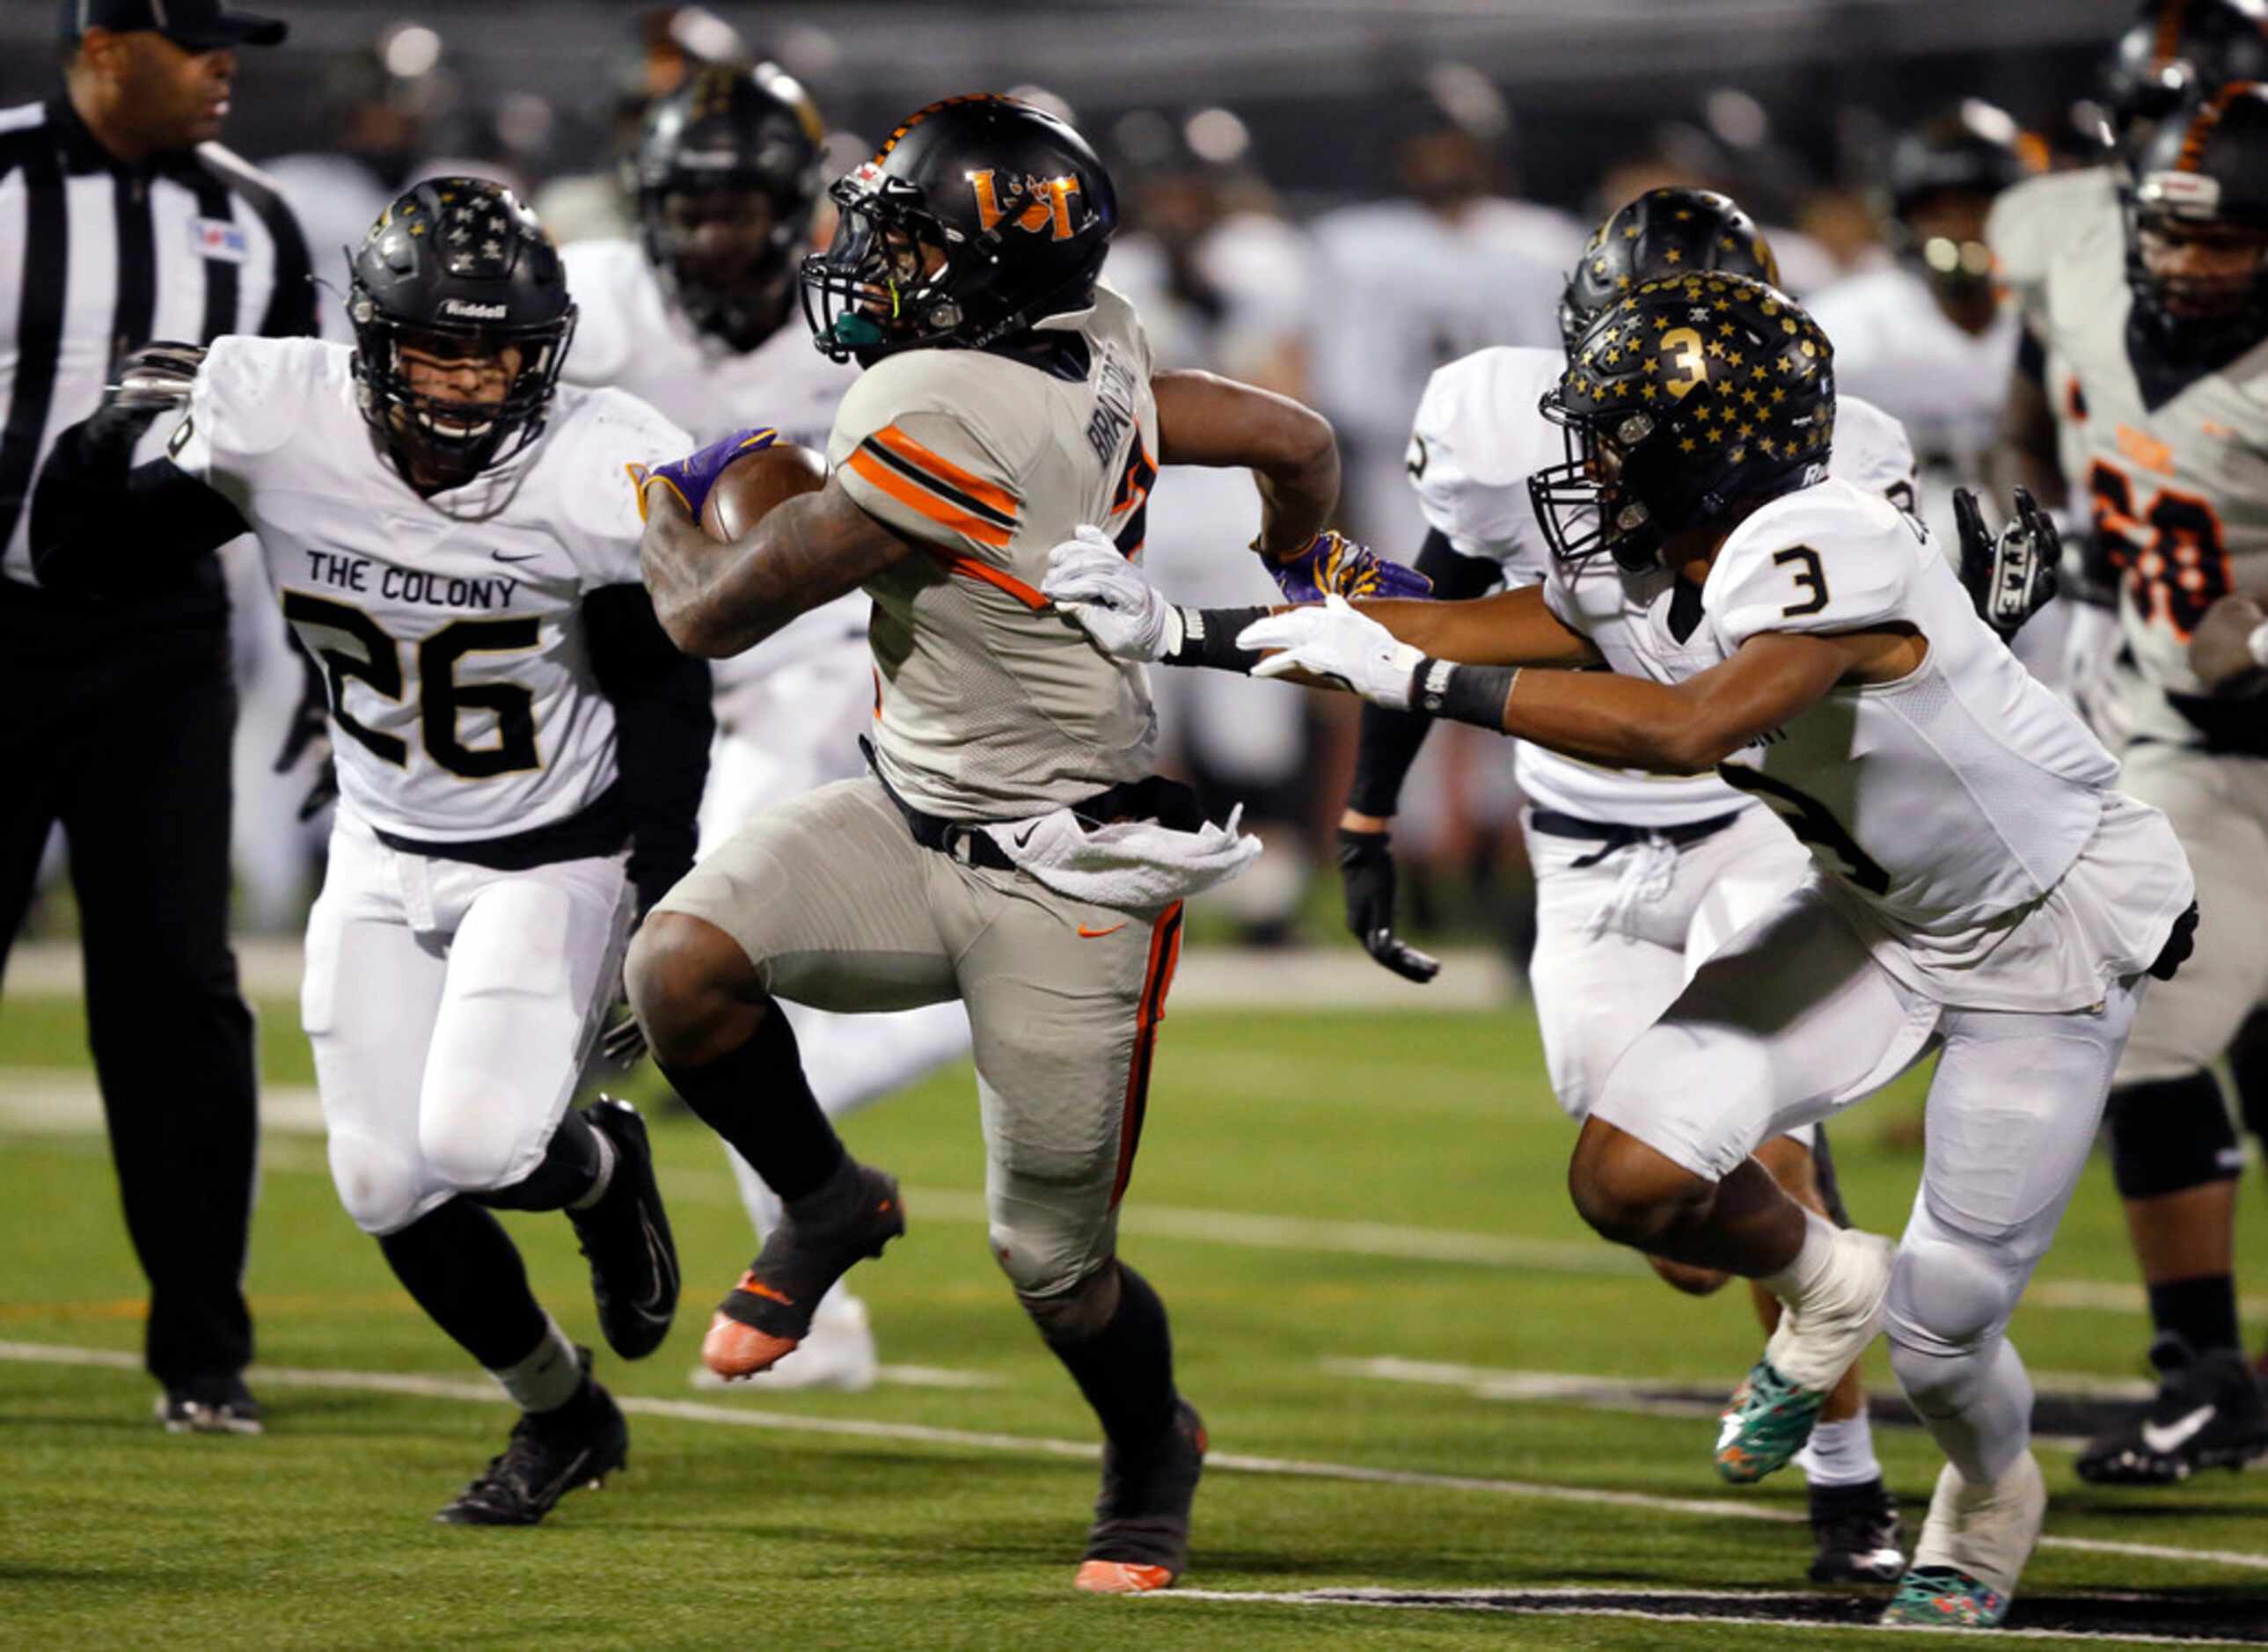 Lancaster running back Tre Bradford (2) breaks a tackle by The Colony's Christian Gonzalez...